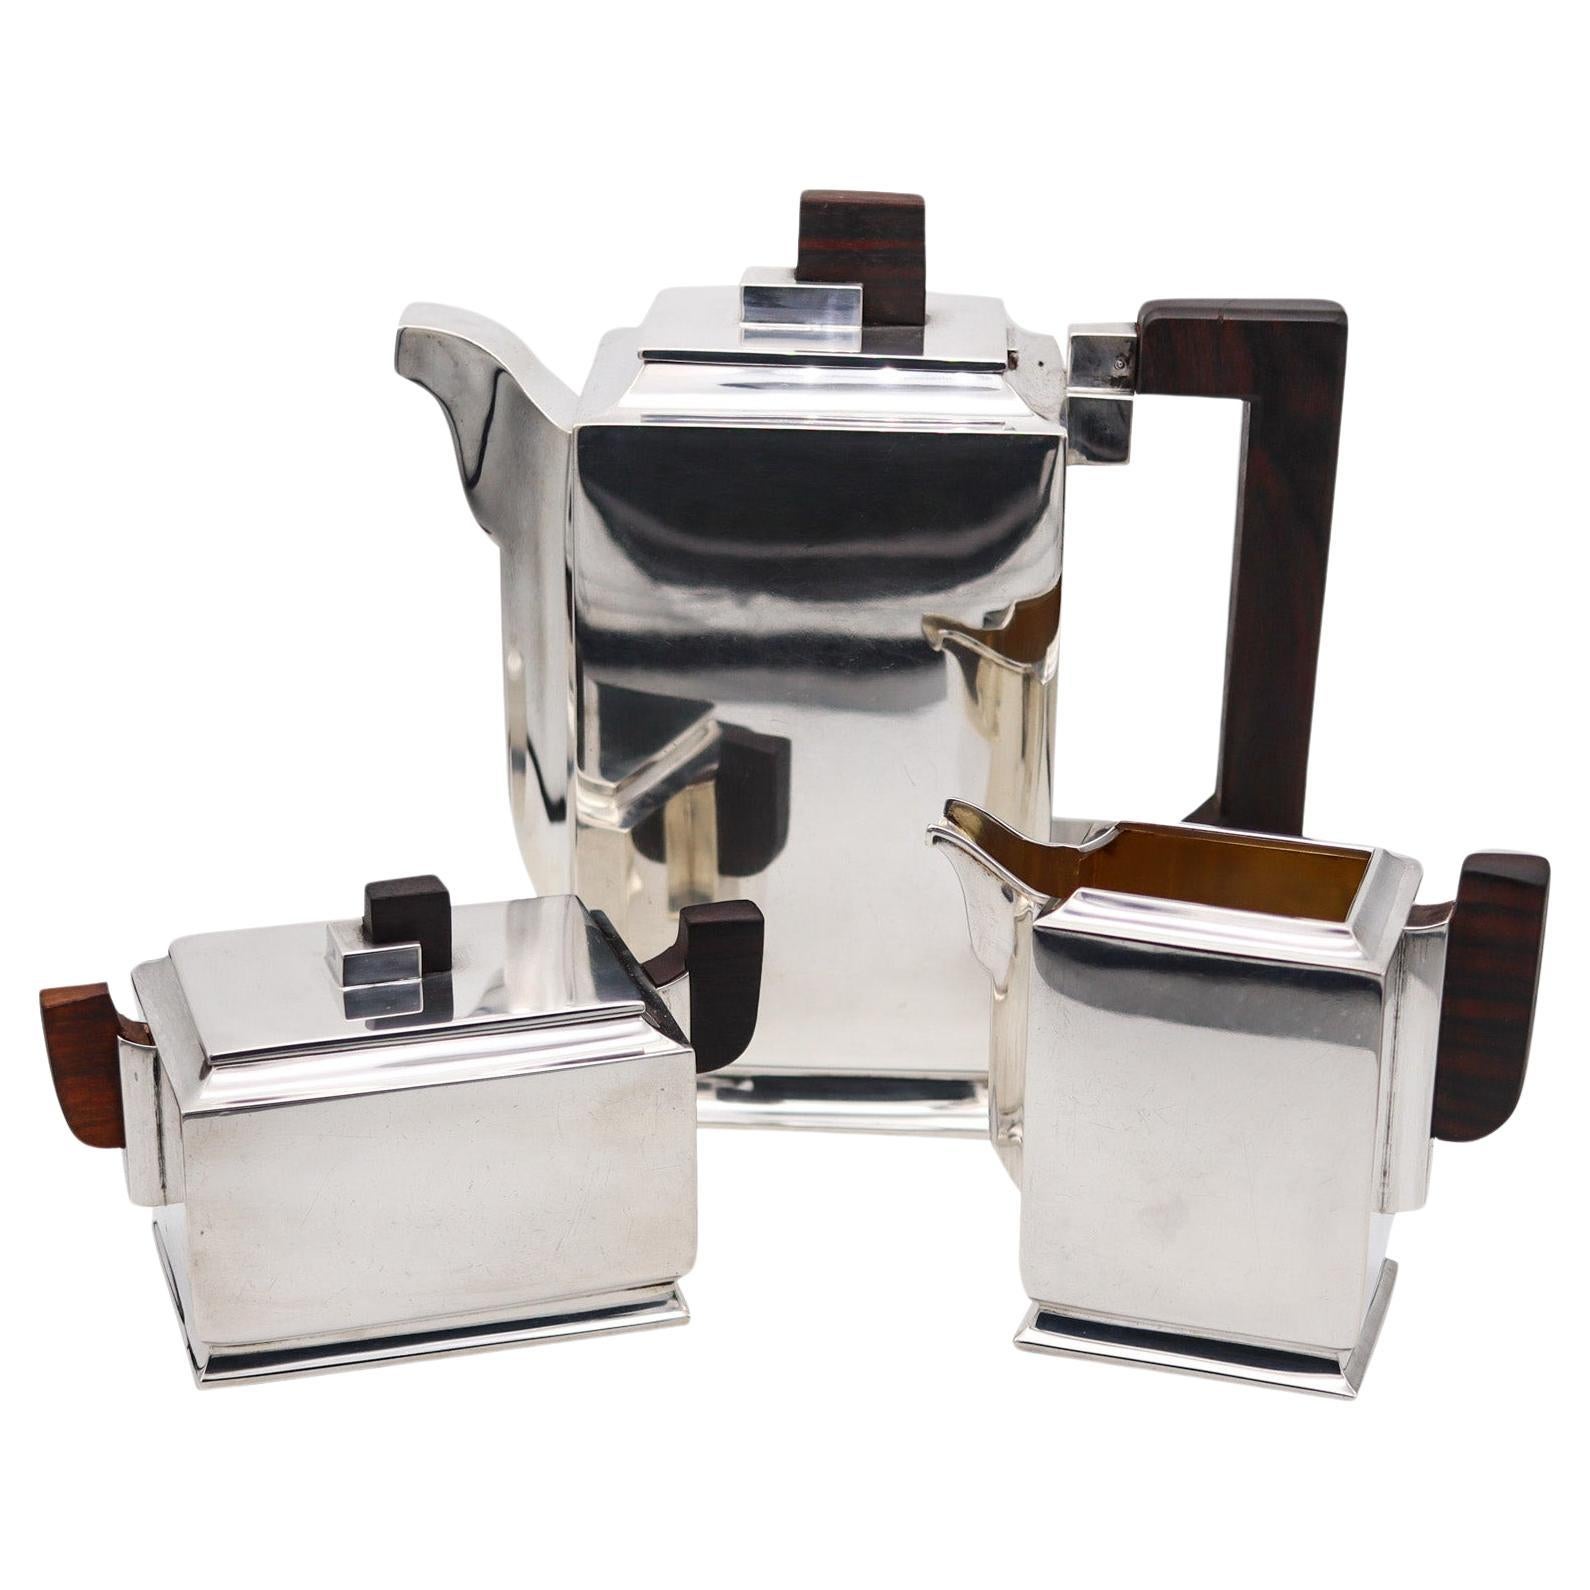 Sweden 1931 Art Deco Bauhaus Geometric Coffee Set In Sterling Silver And Ebony For Sale